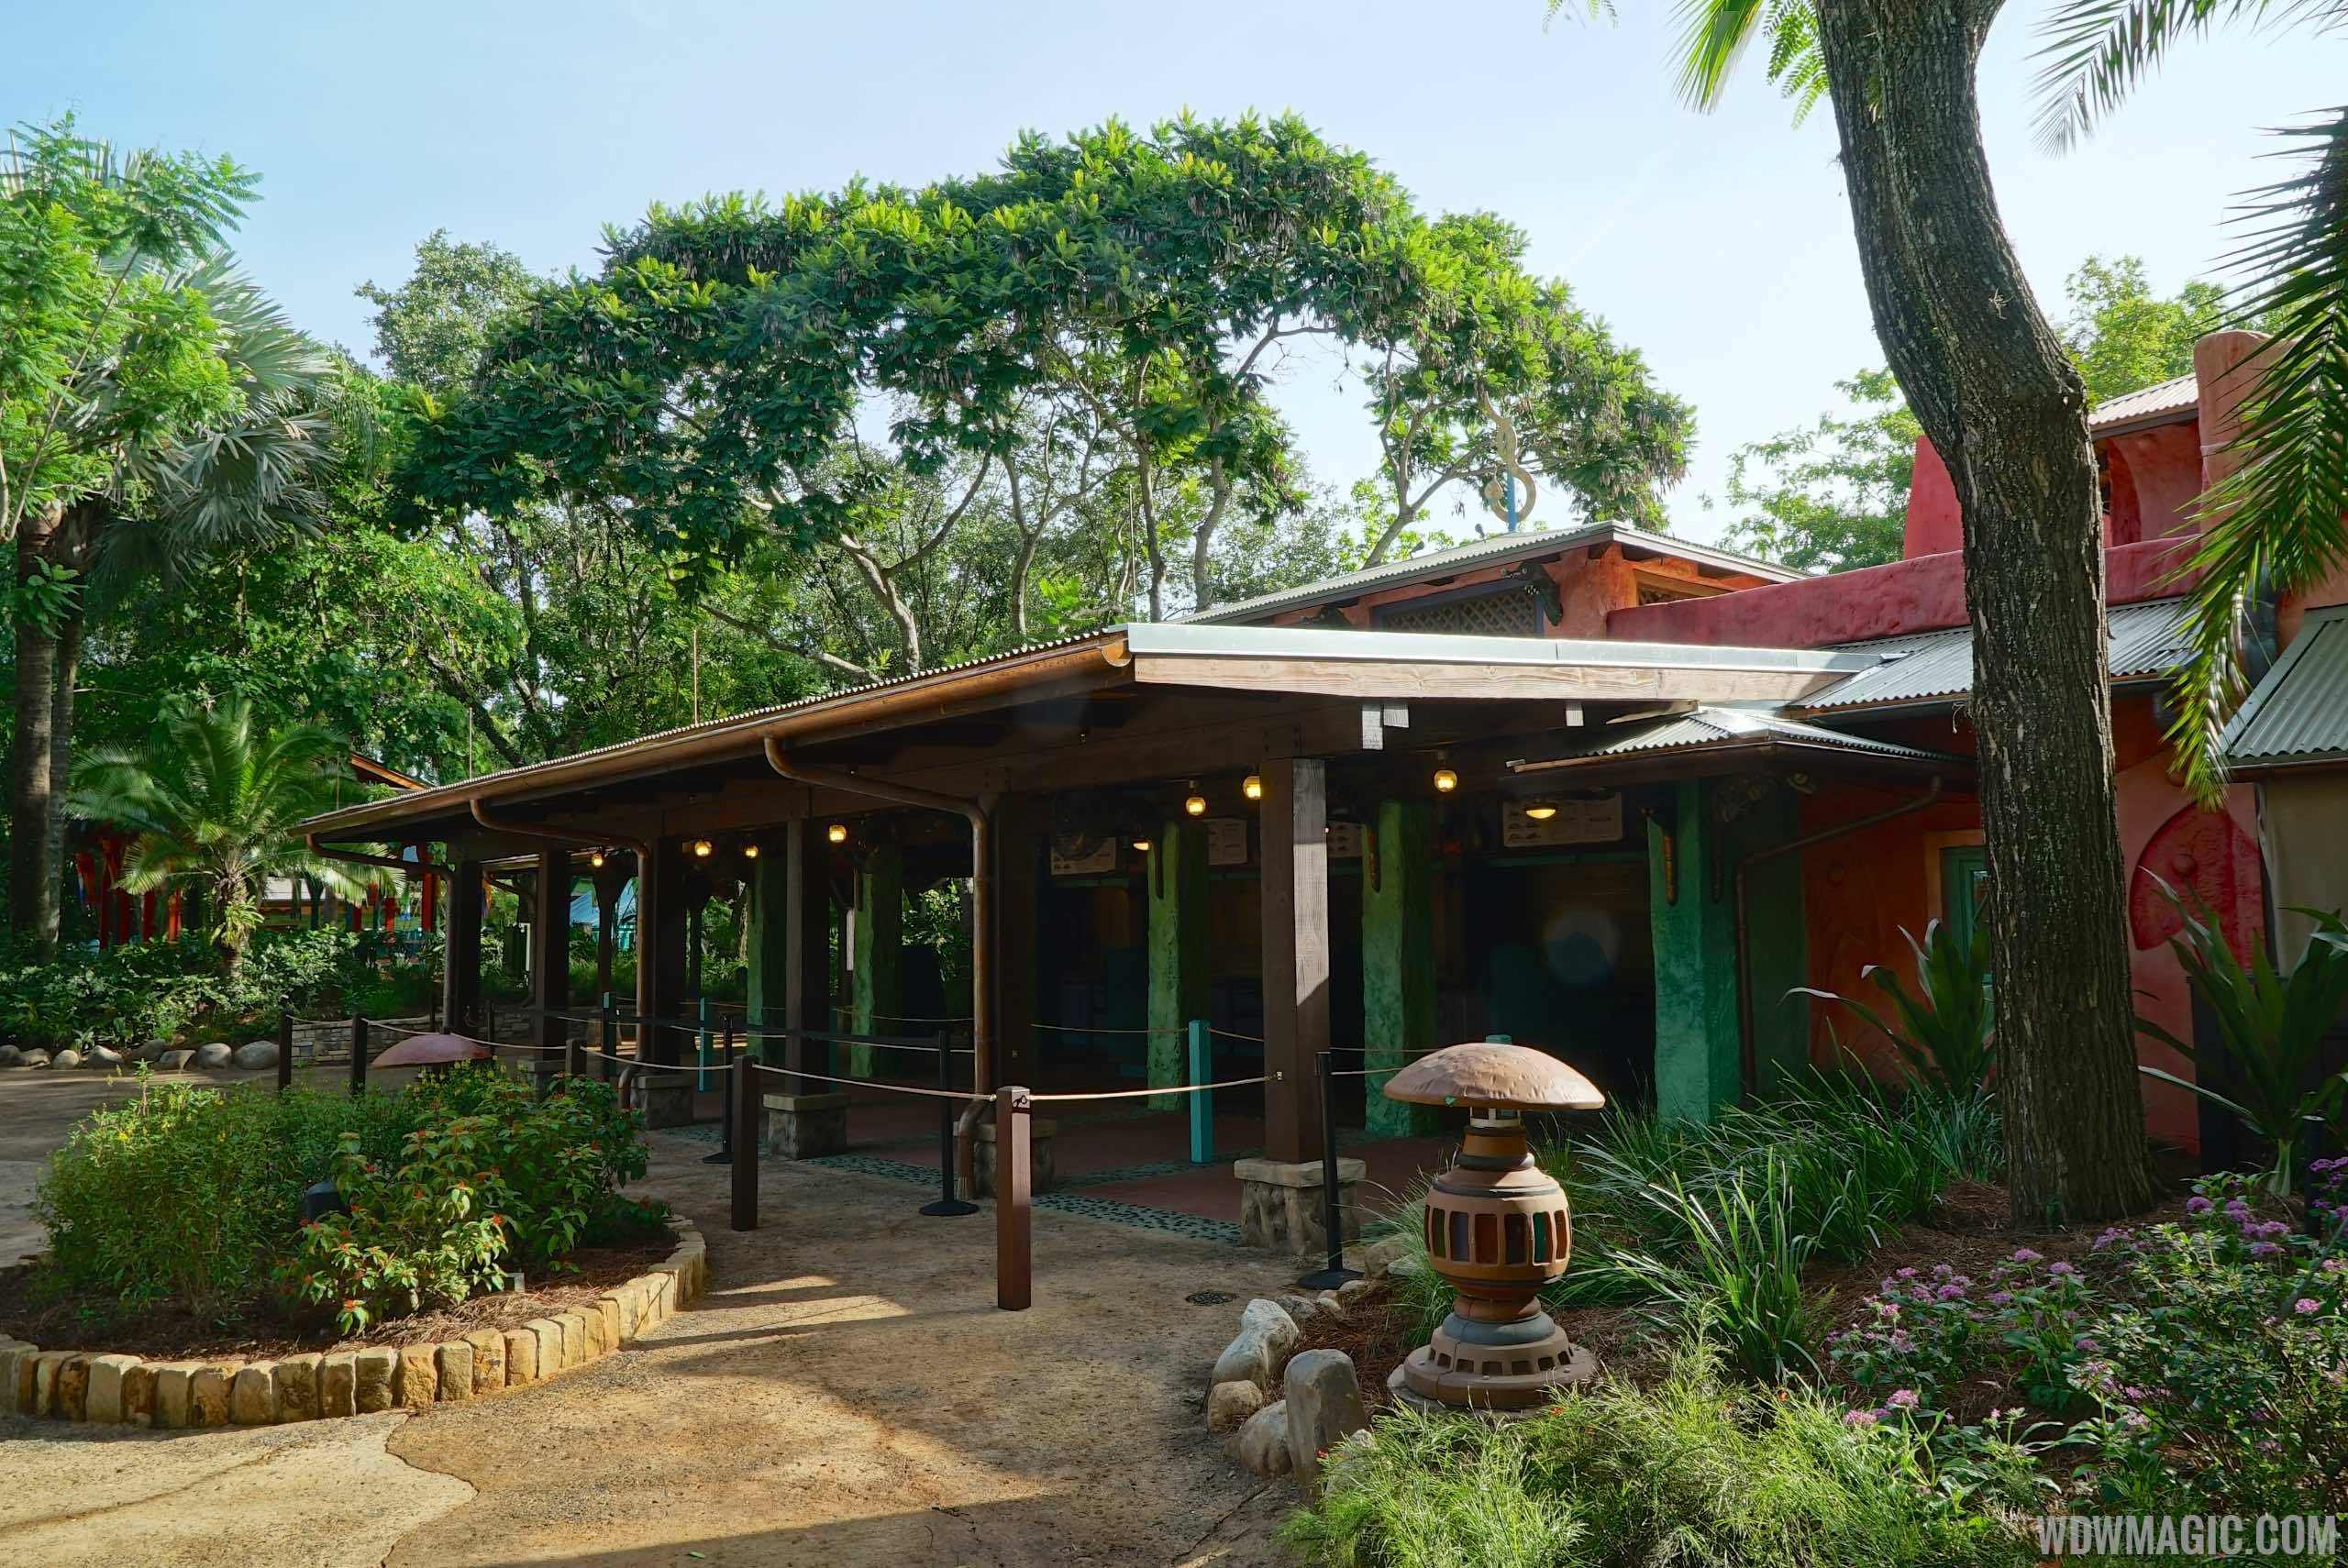 Flame Tree Barbecue closing for extensive remodel at Disney's Animal Kingdom